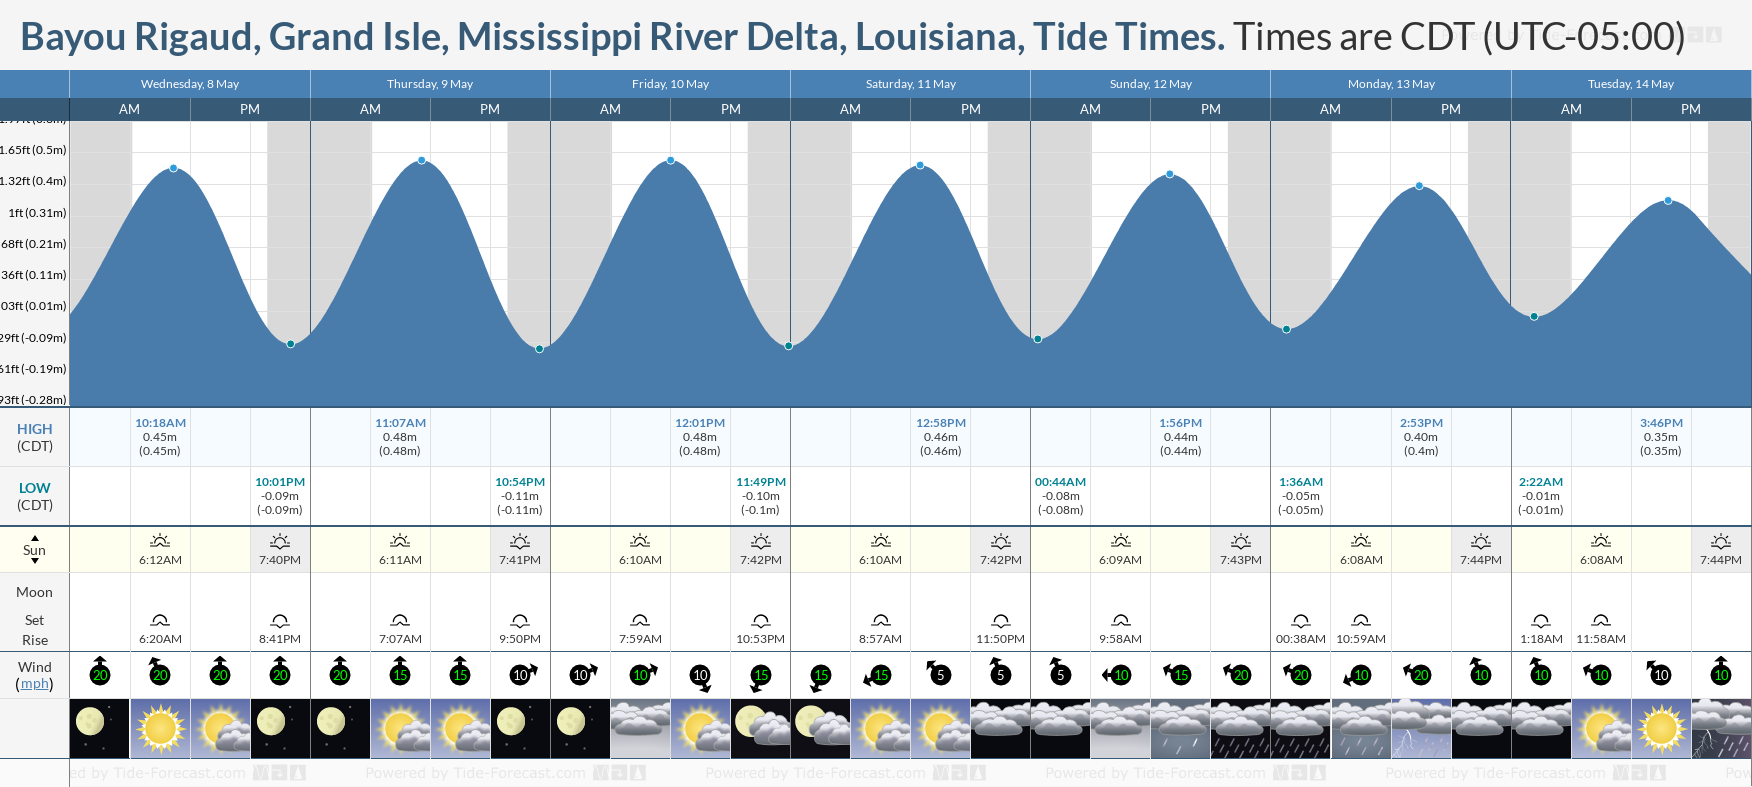 Bayou Rigaud, Grand Isle, Mississippi River Delta, Louisiana Tide Chart including high and low tide tide times for the next 7 days